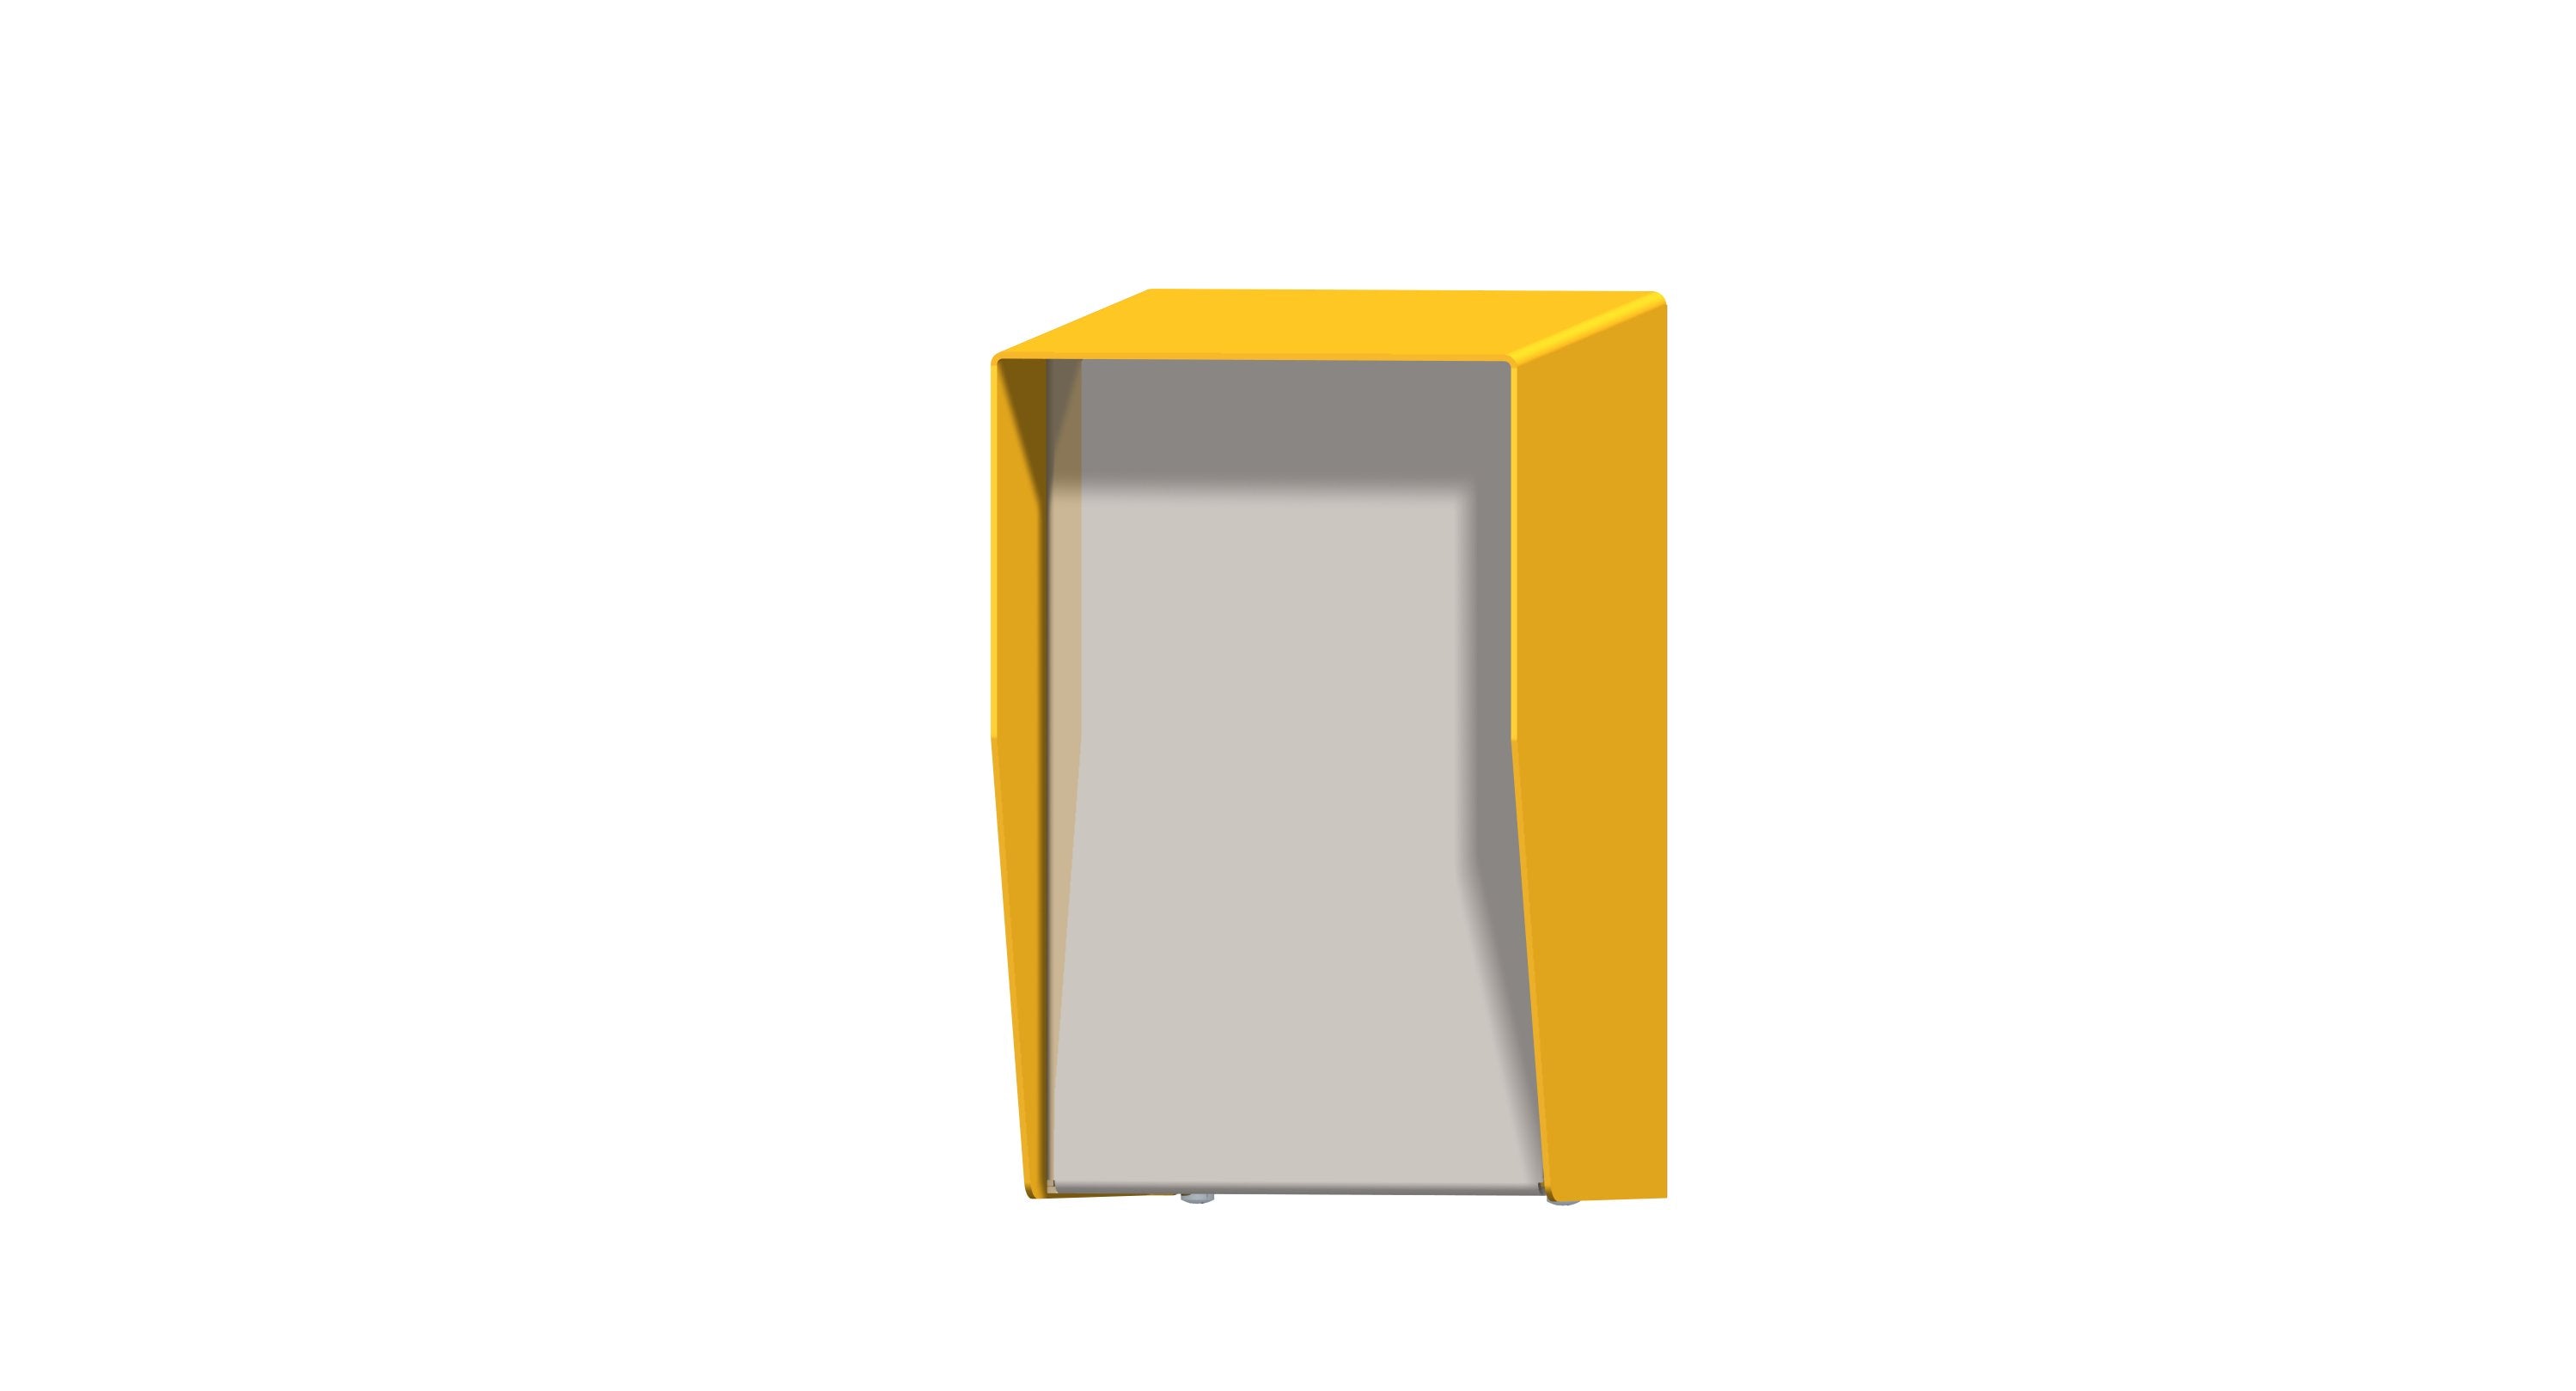 SEC DESIGN SDCSERS2013XDY CO RAINHOOD TO SUIT SEQ & SEW SERIES ARMS AND BOLLARDS 68MM SPACE BEHIND ALUMINIUM MOUNTING PANEL (200HX130W MTD PANEL) 212H X 138W (MM) YELLOW (Contact us for Shipping details)